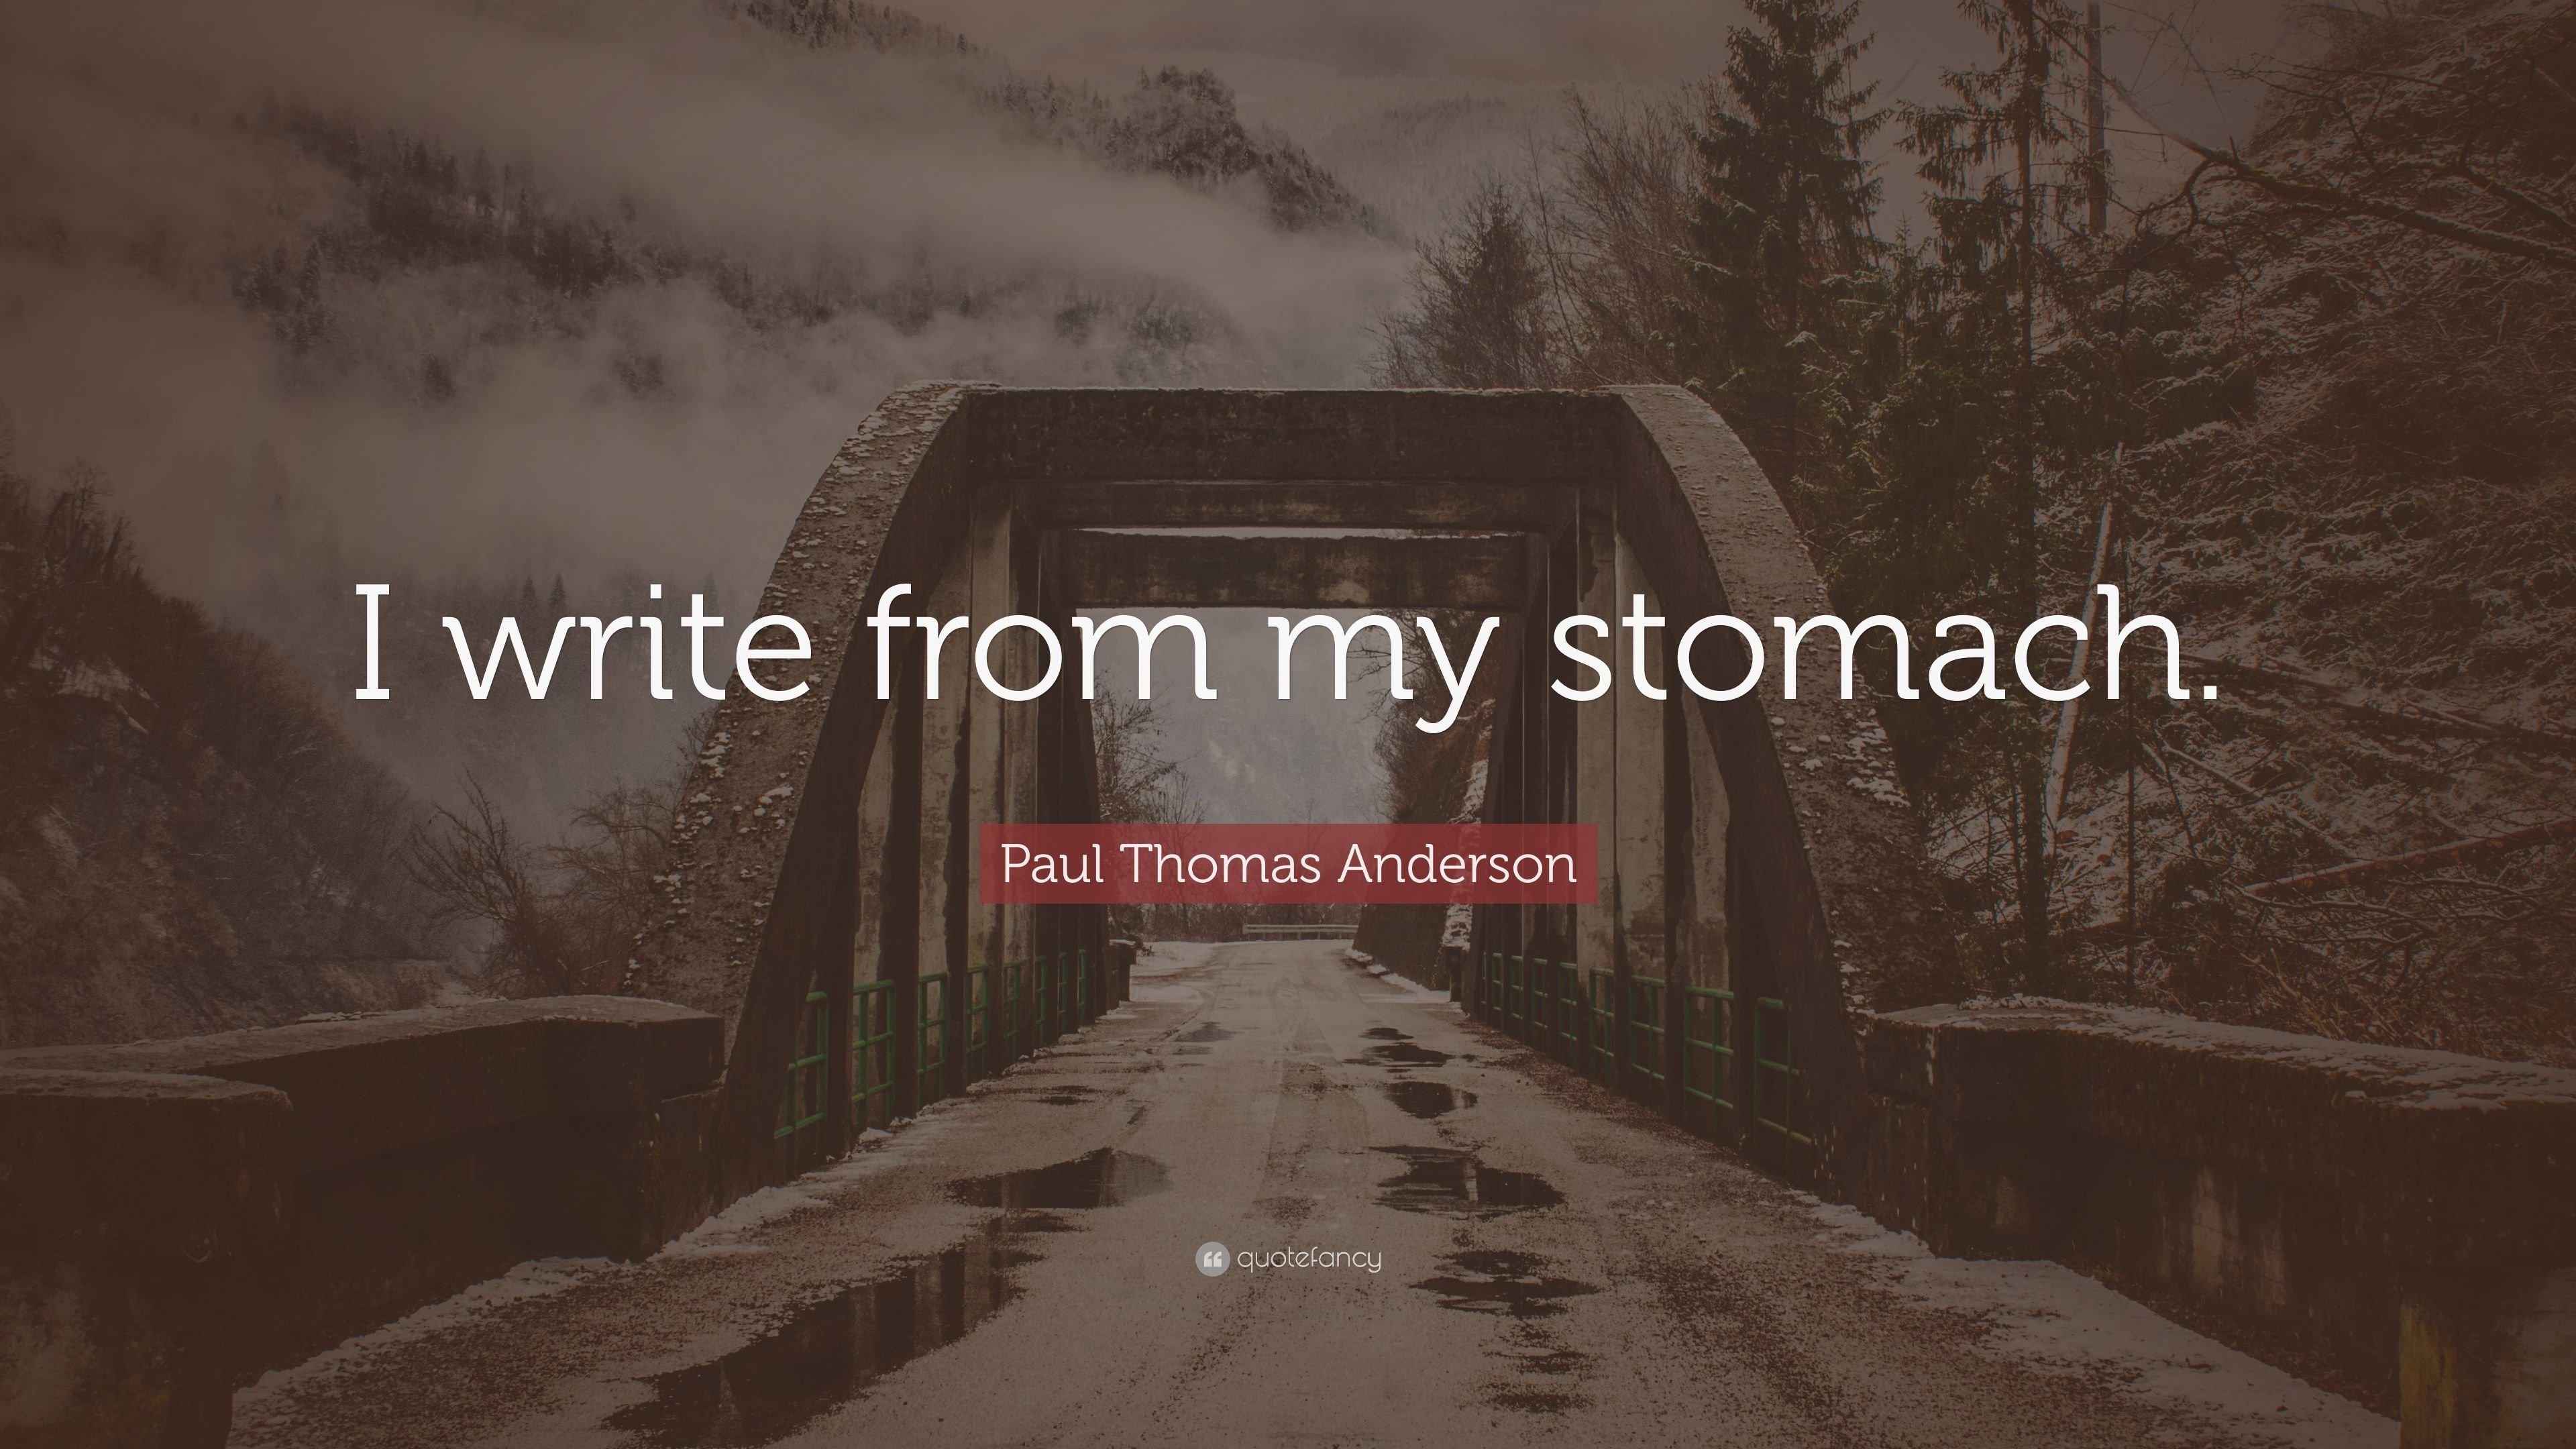 Paul Thomas Anderson Quote: “I write from my stomach.” 10